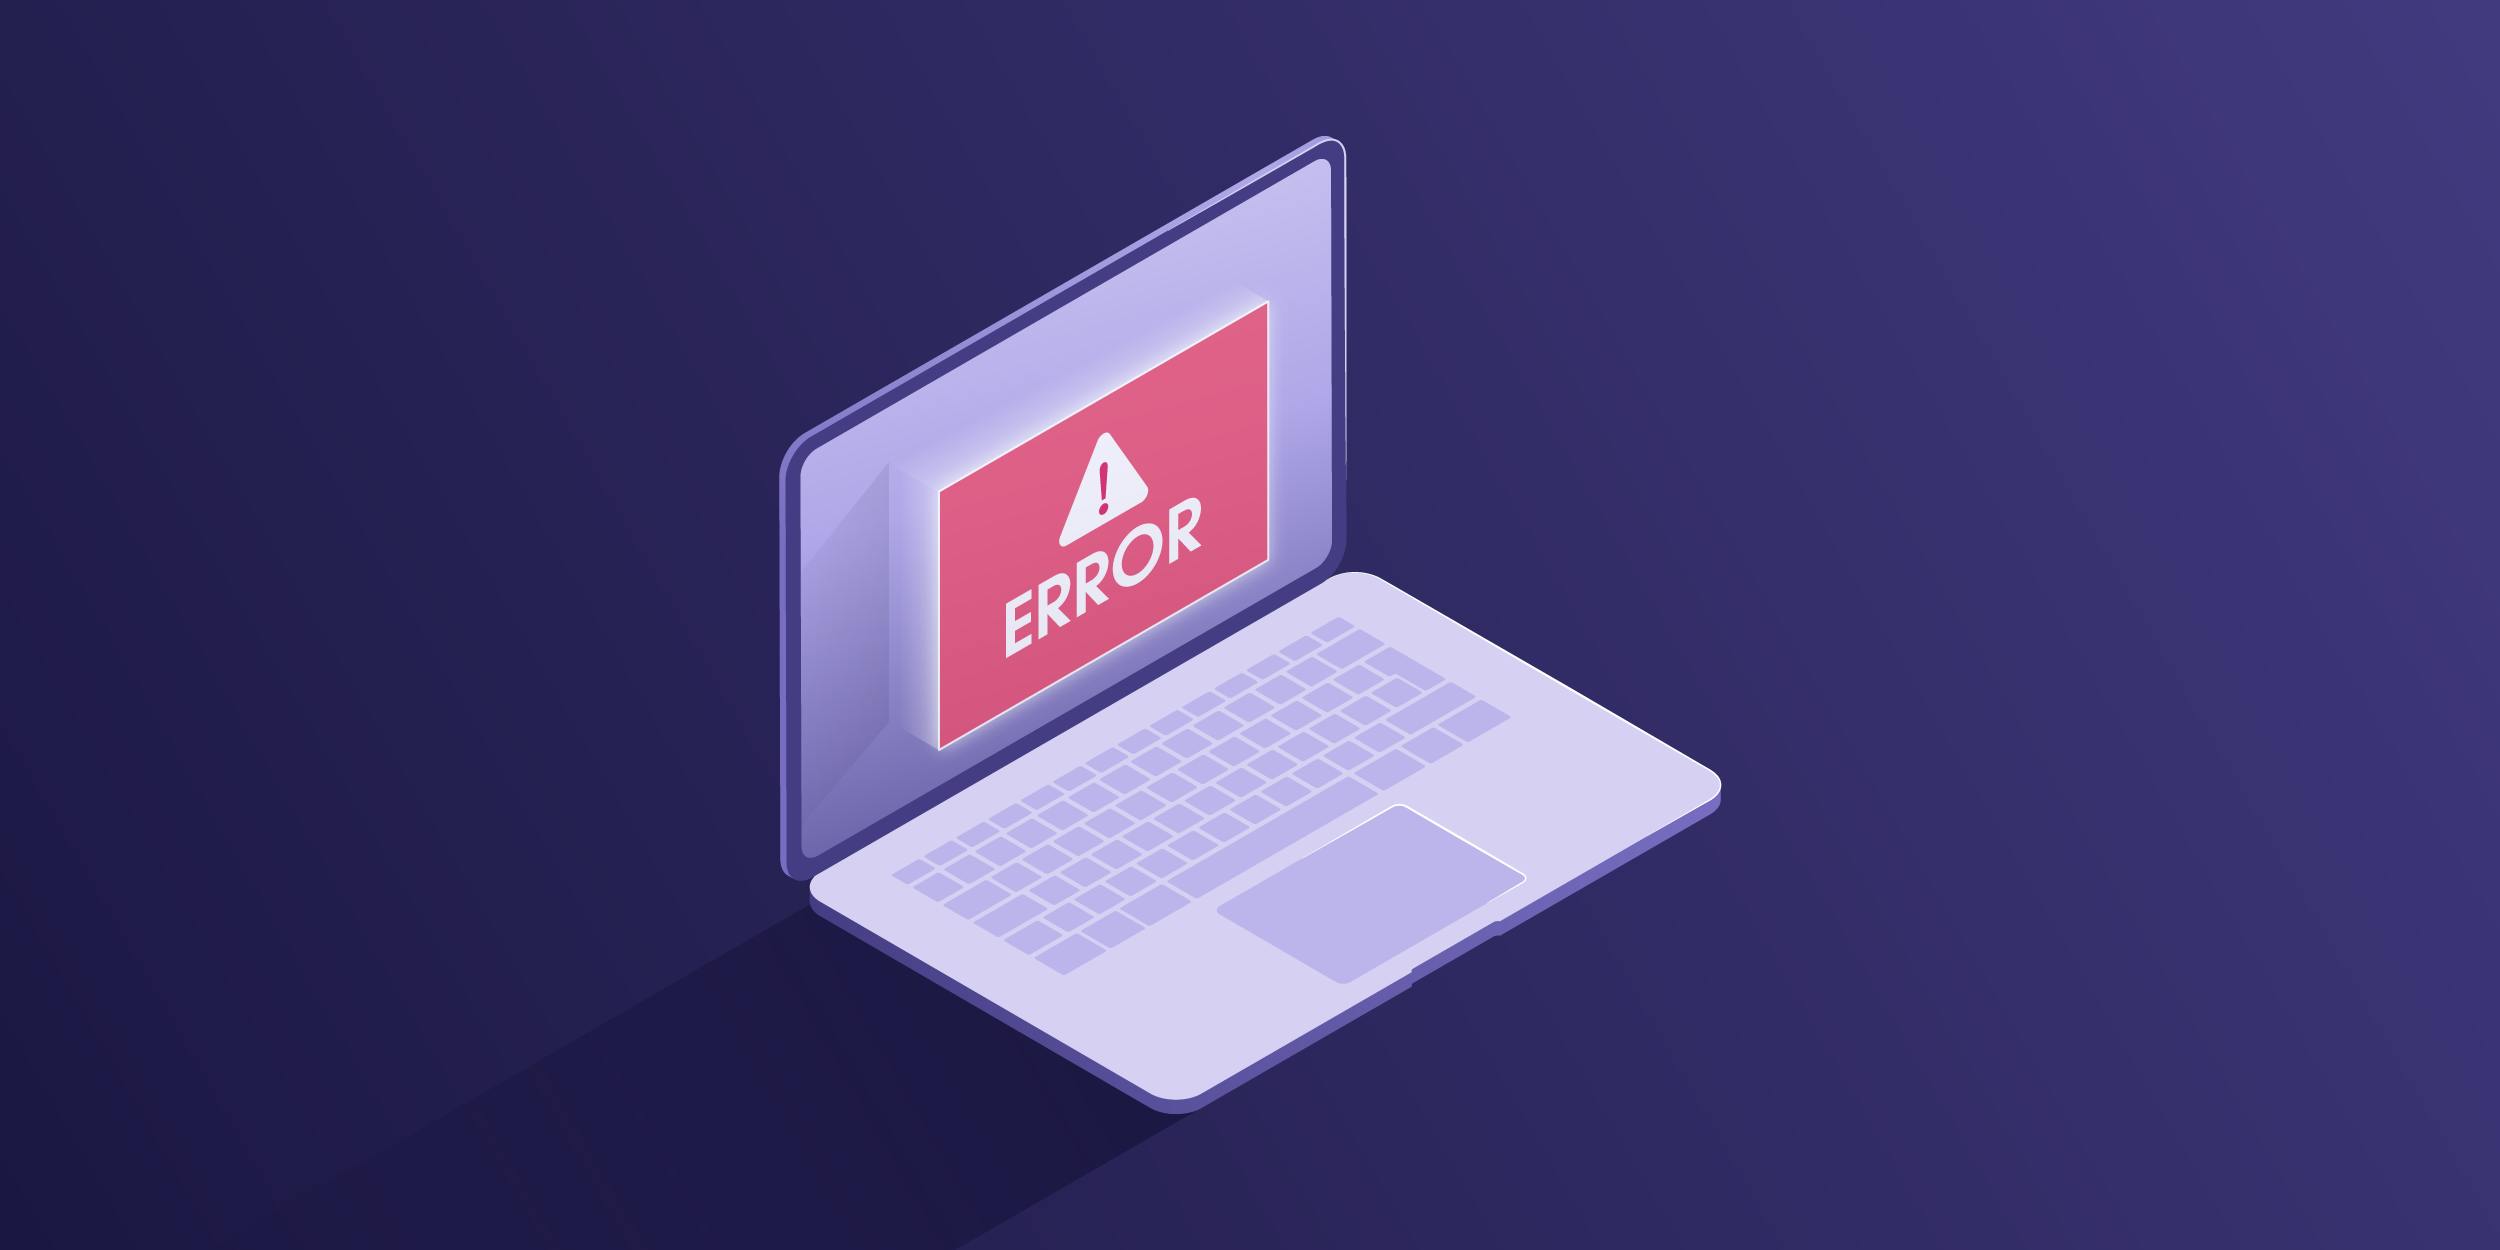 The Complete Guide to Proxy Error Codes and Their Solutions - Nimble